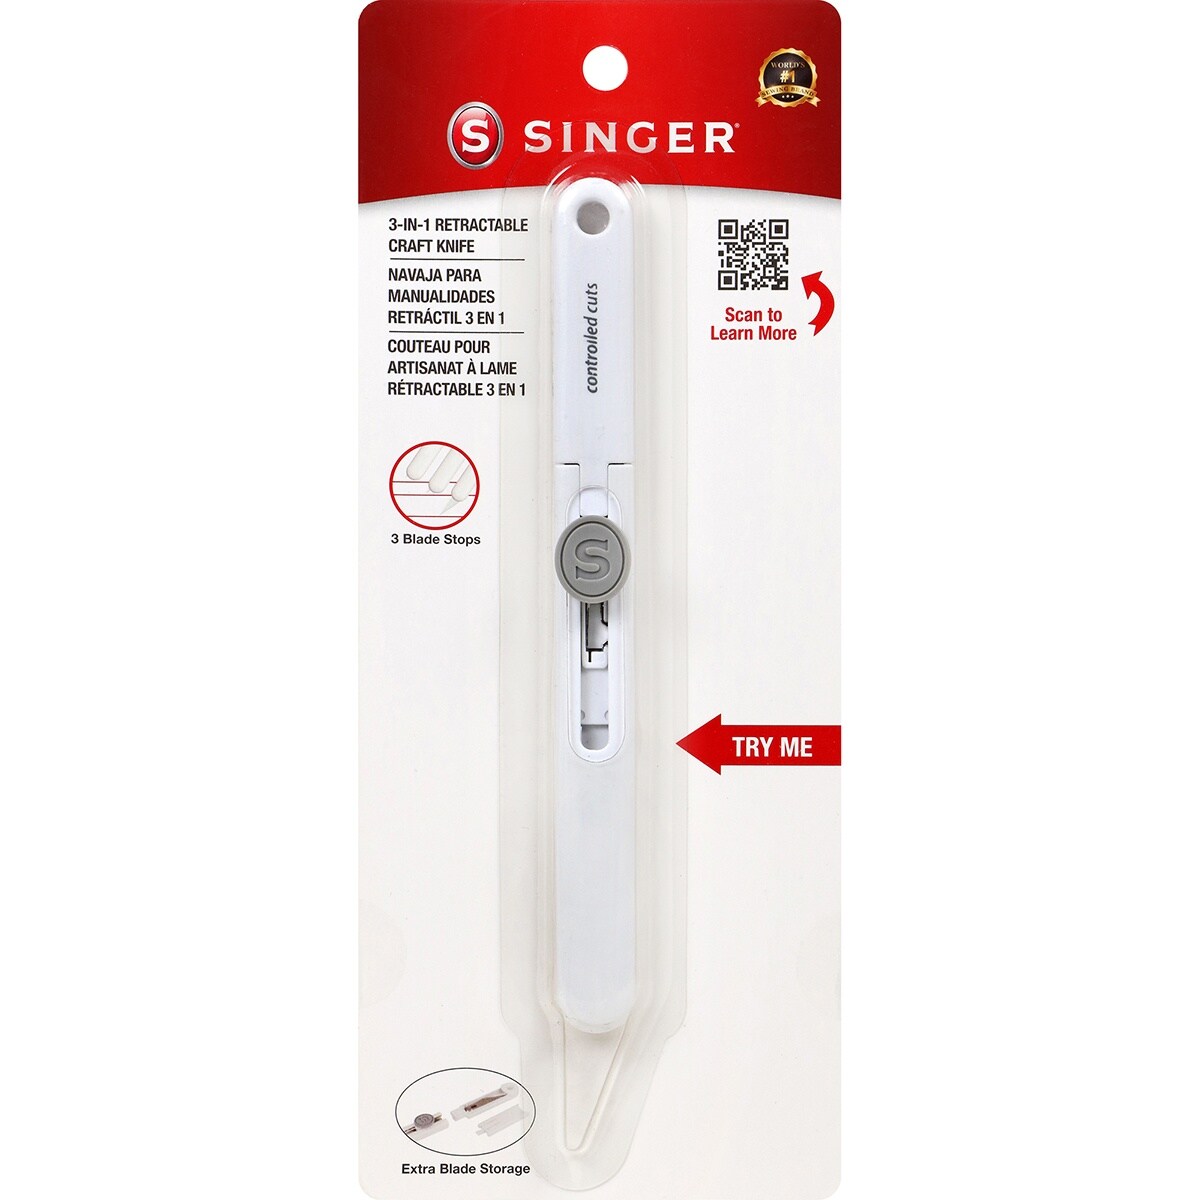 SINGER 3-in-1 Retractable Craft Knife-With Blade Storage